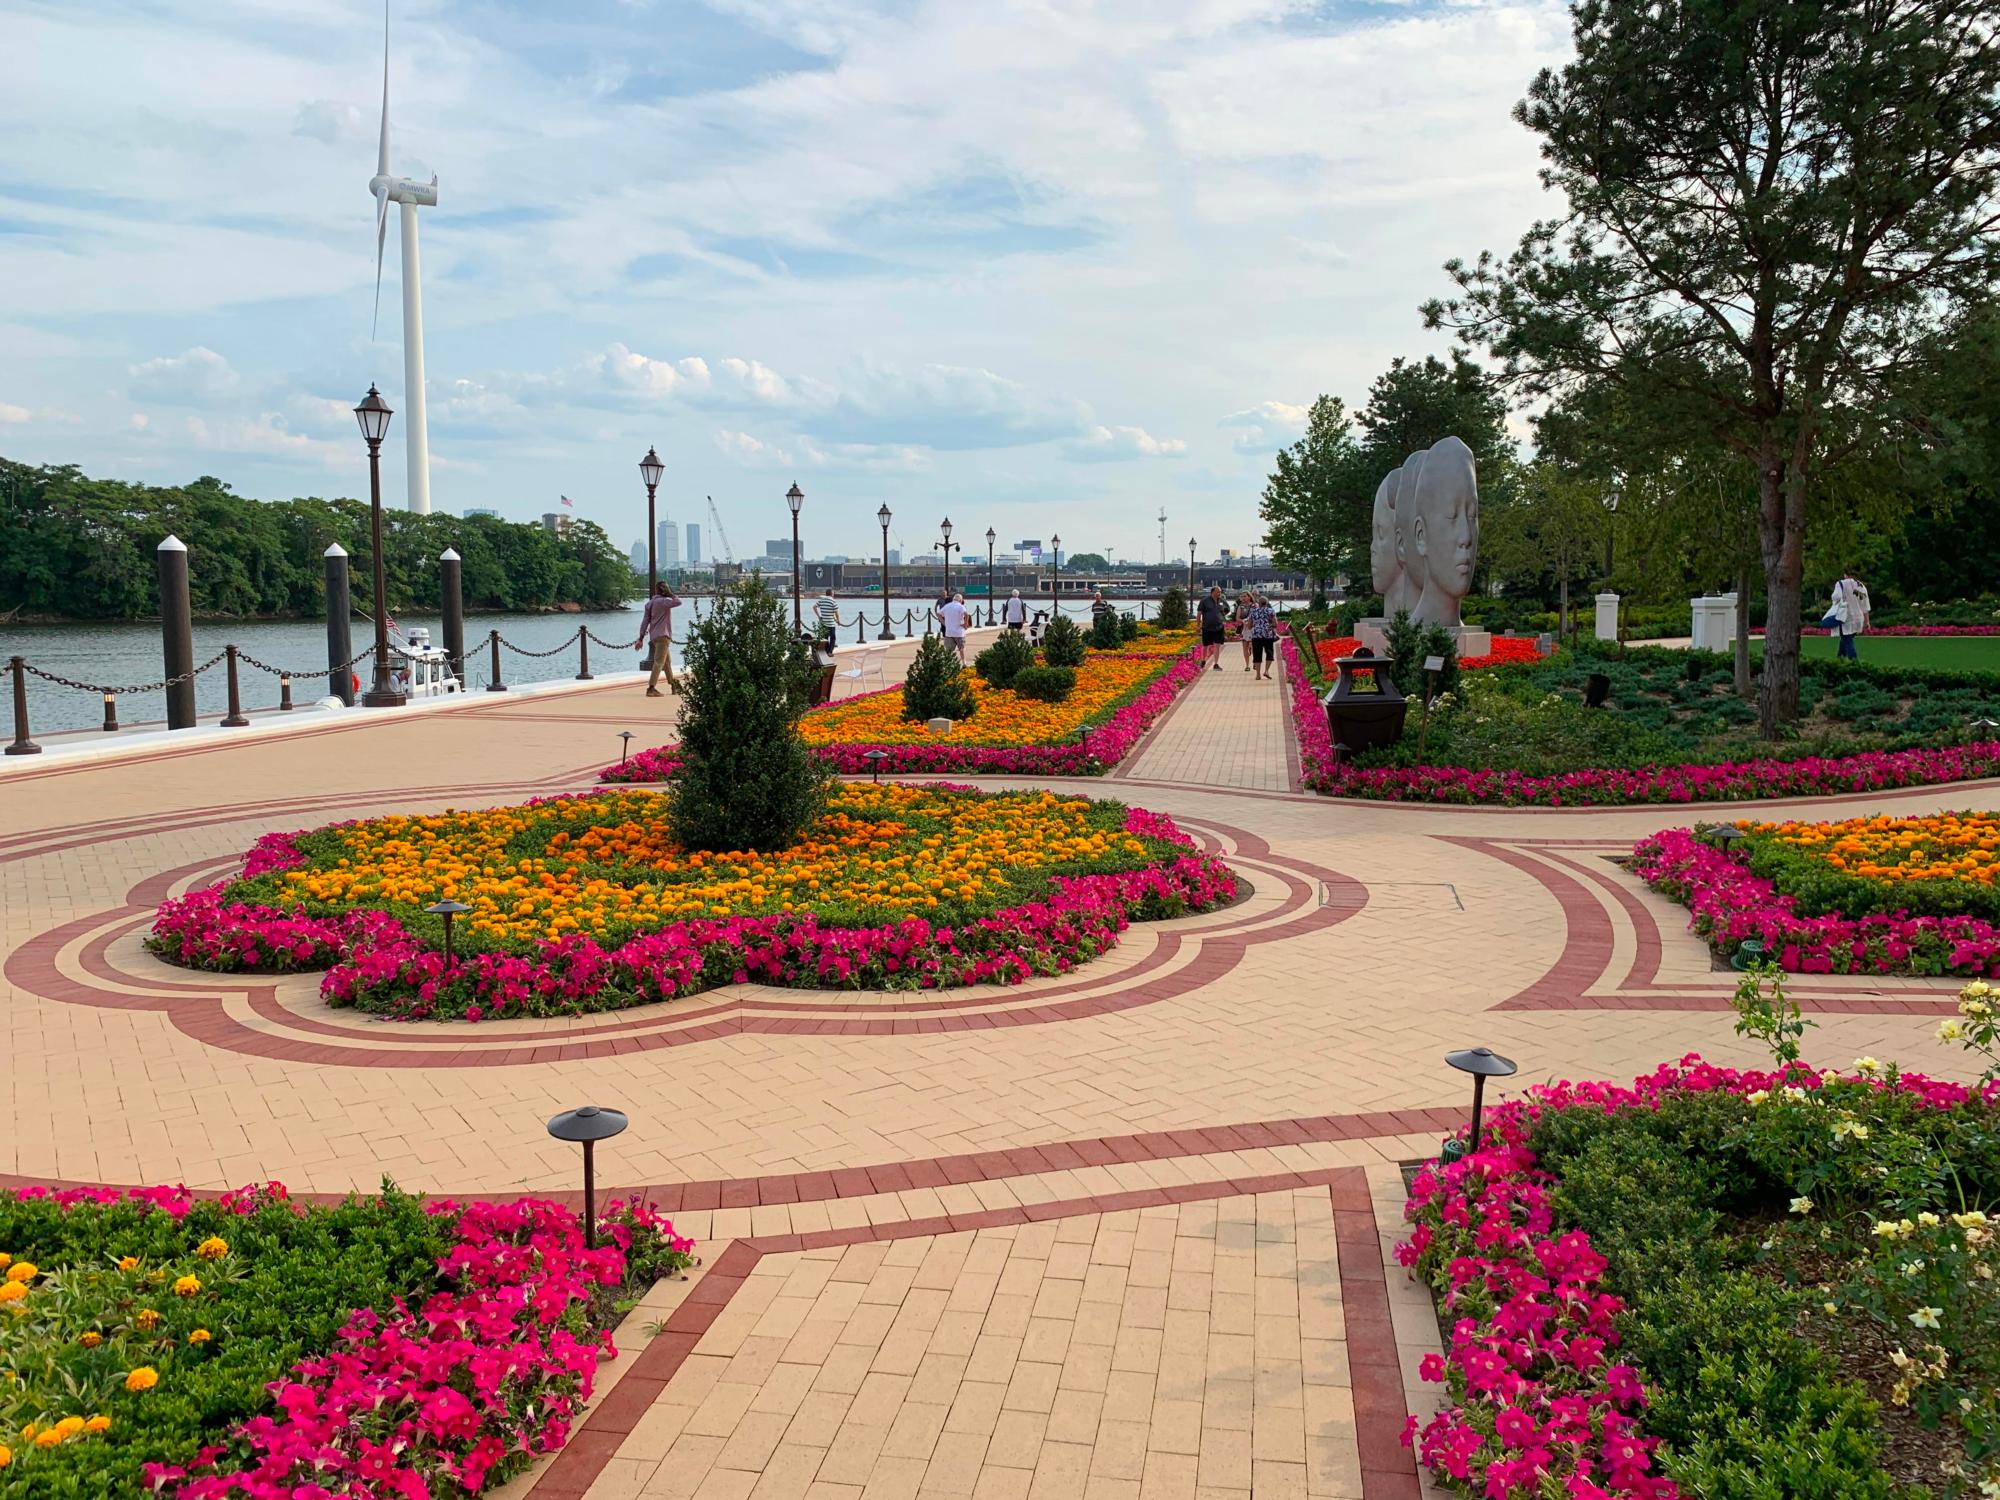 Image of the red and beige brick walkway along the riverfront of the Encore Casino with flowers between the walks